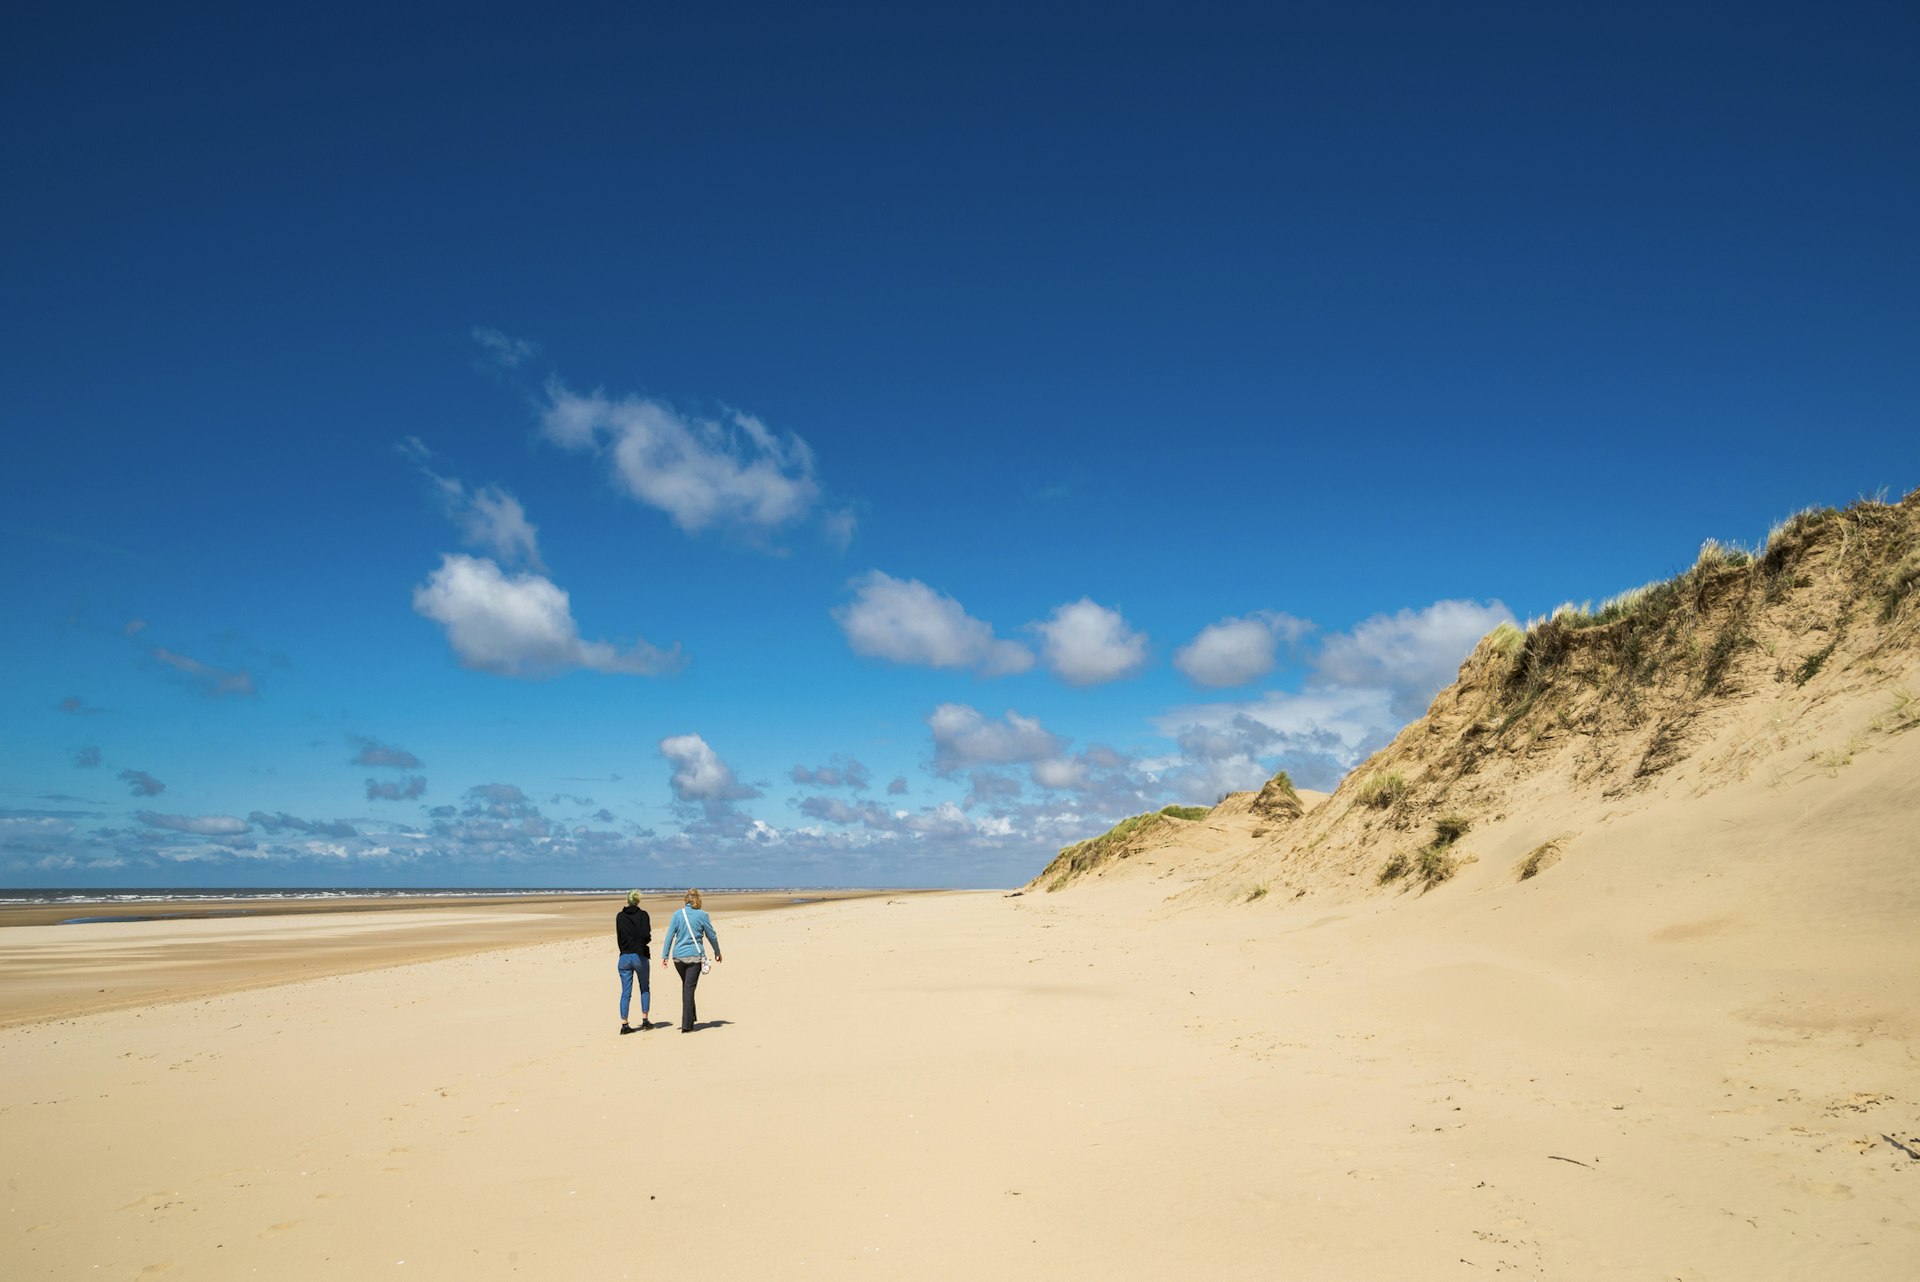 Two people walk along a vast empty sandy beach, with sea to their left and sand dunes to their right